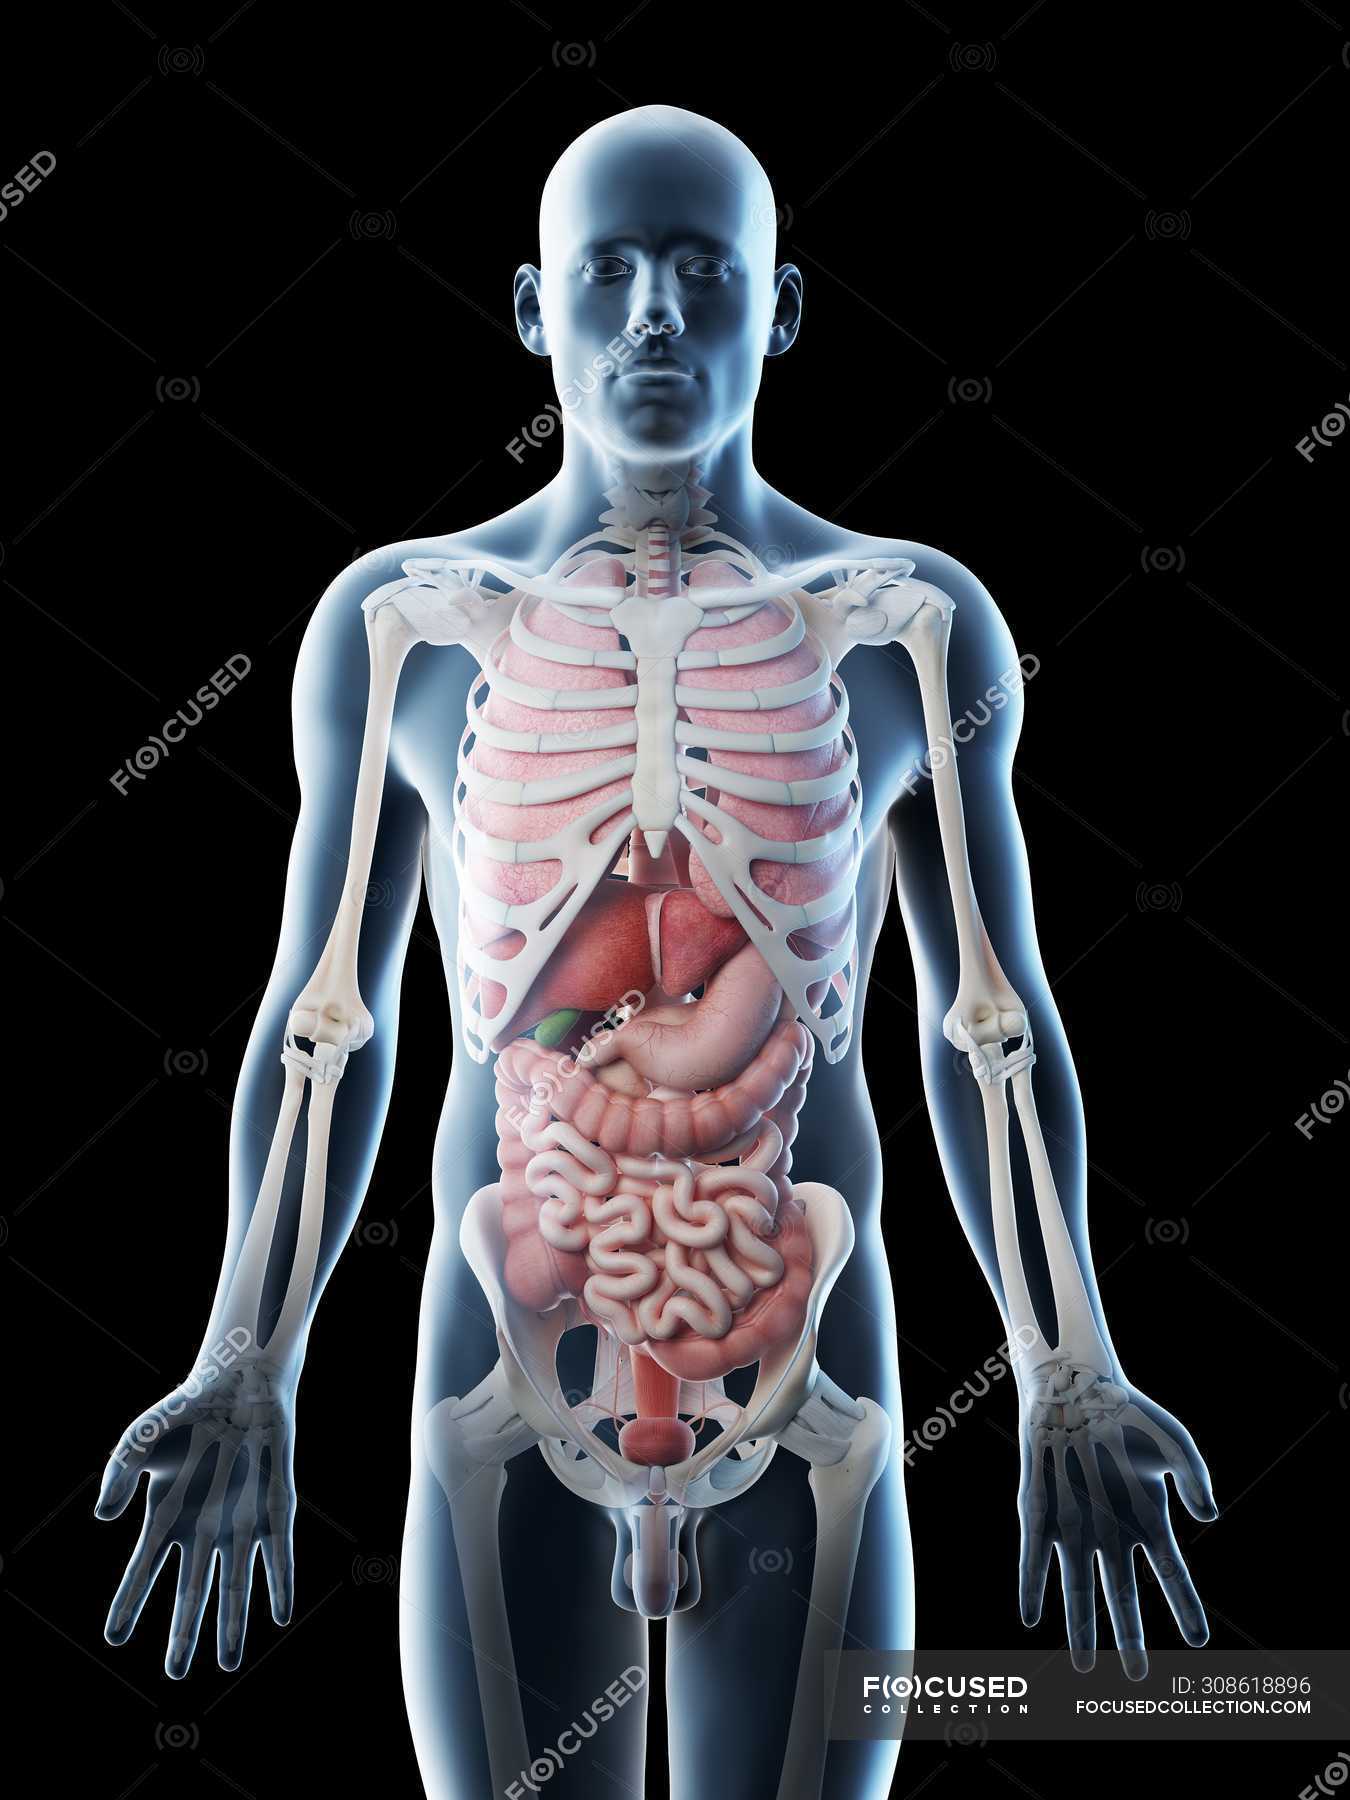 Male Internal Organs Male Anatomy Of The Body - 3d Visualization Of The